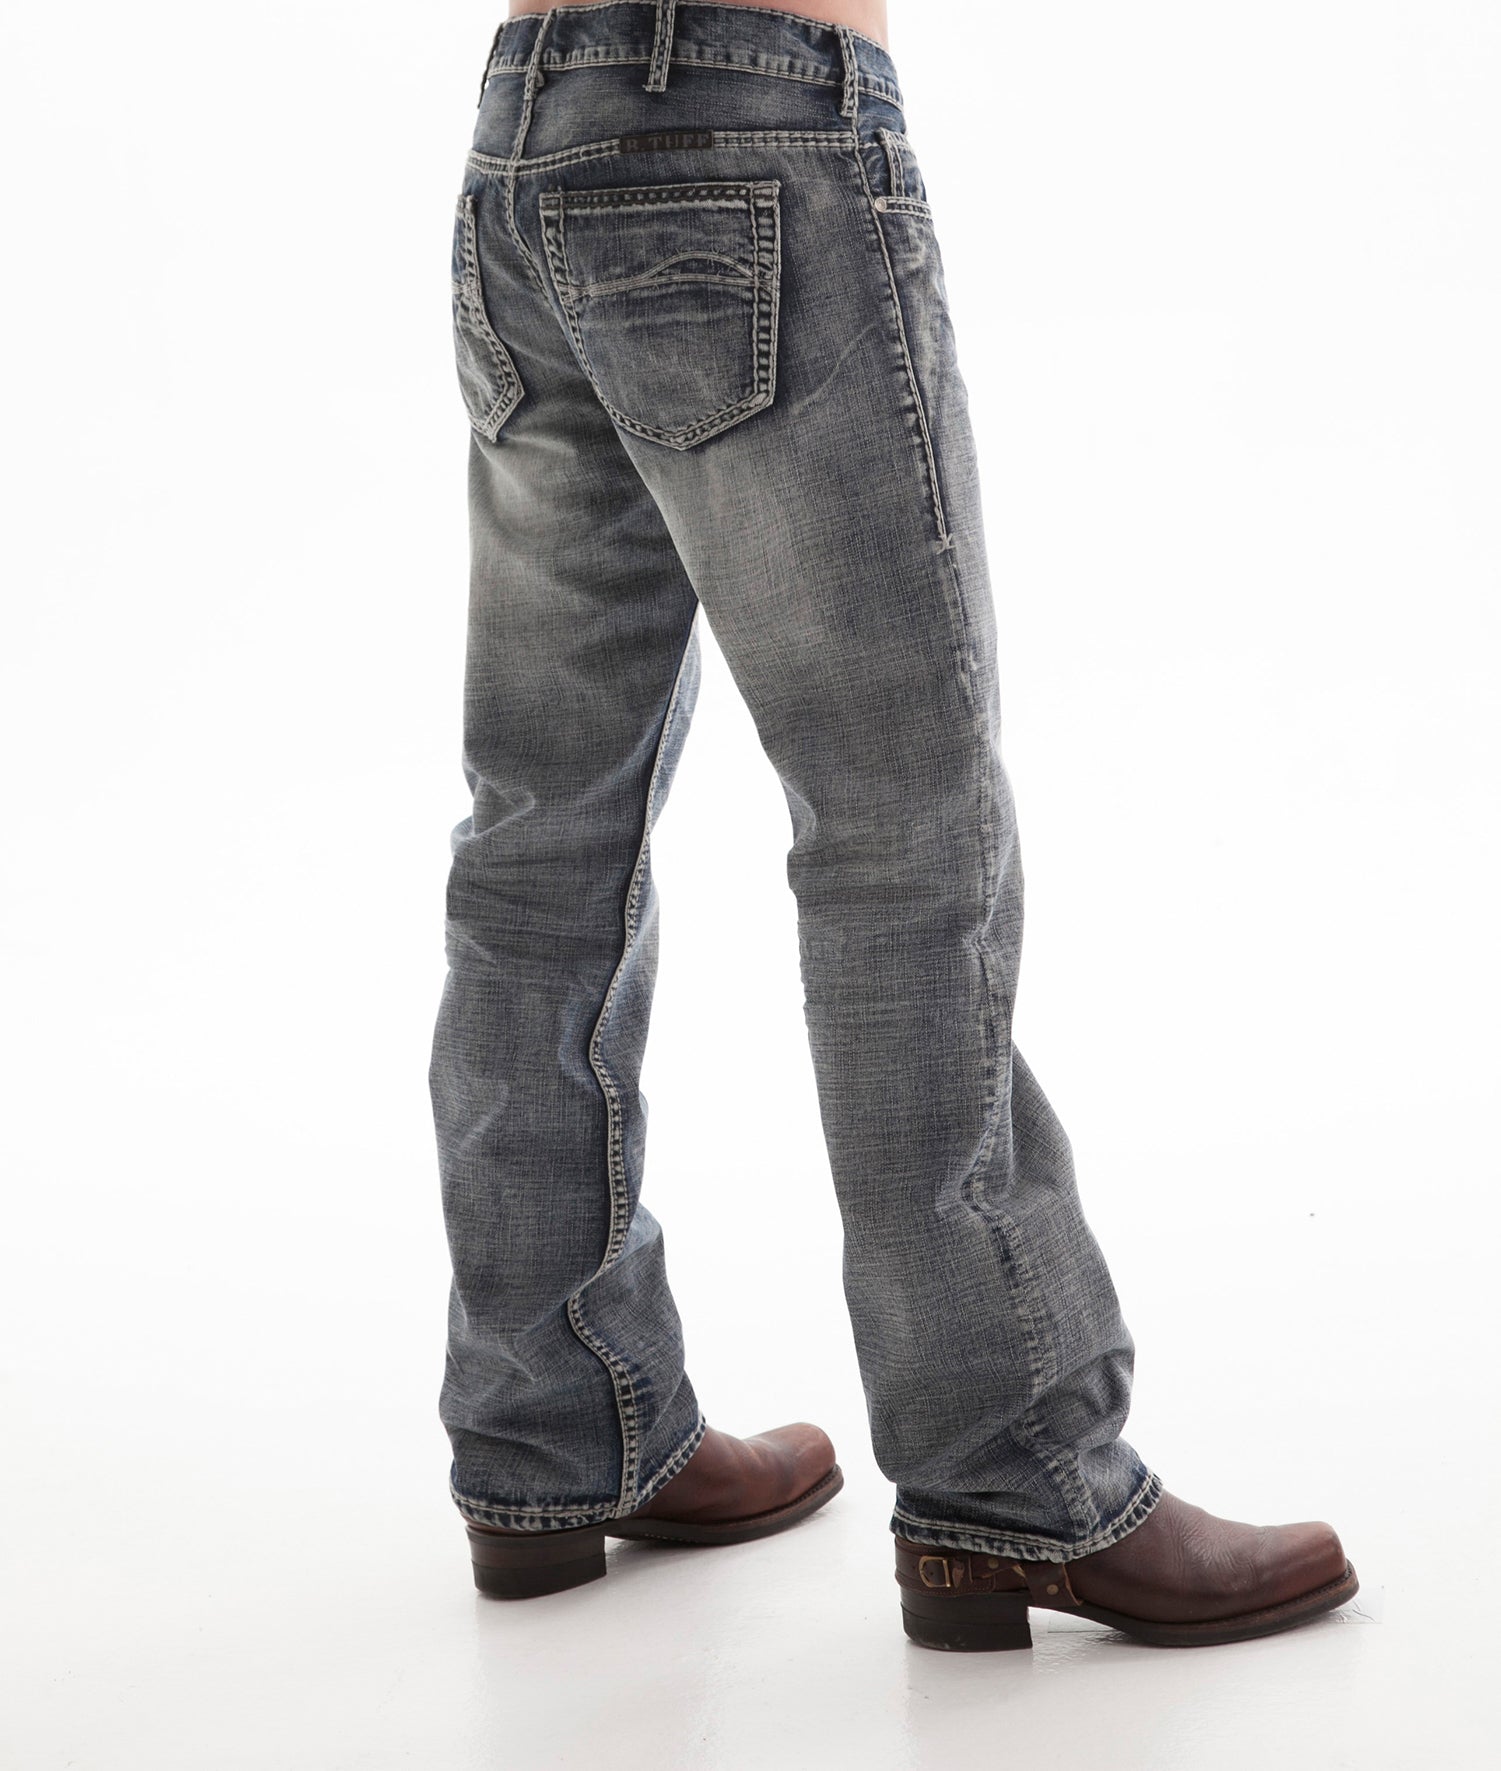 Big Men's Selvedge Tapered Jeans Made in USA |Williamsburg Garment Co.